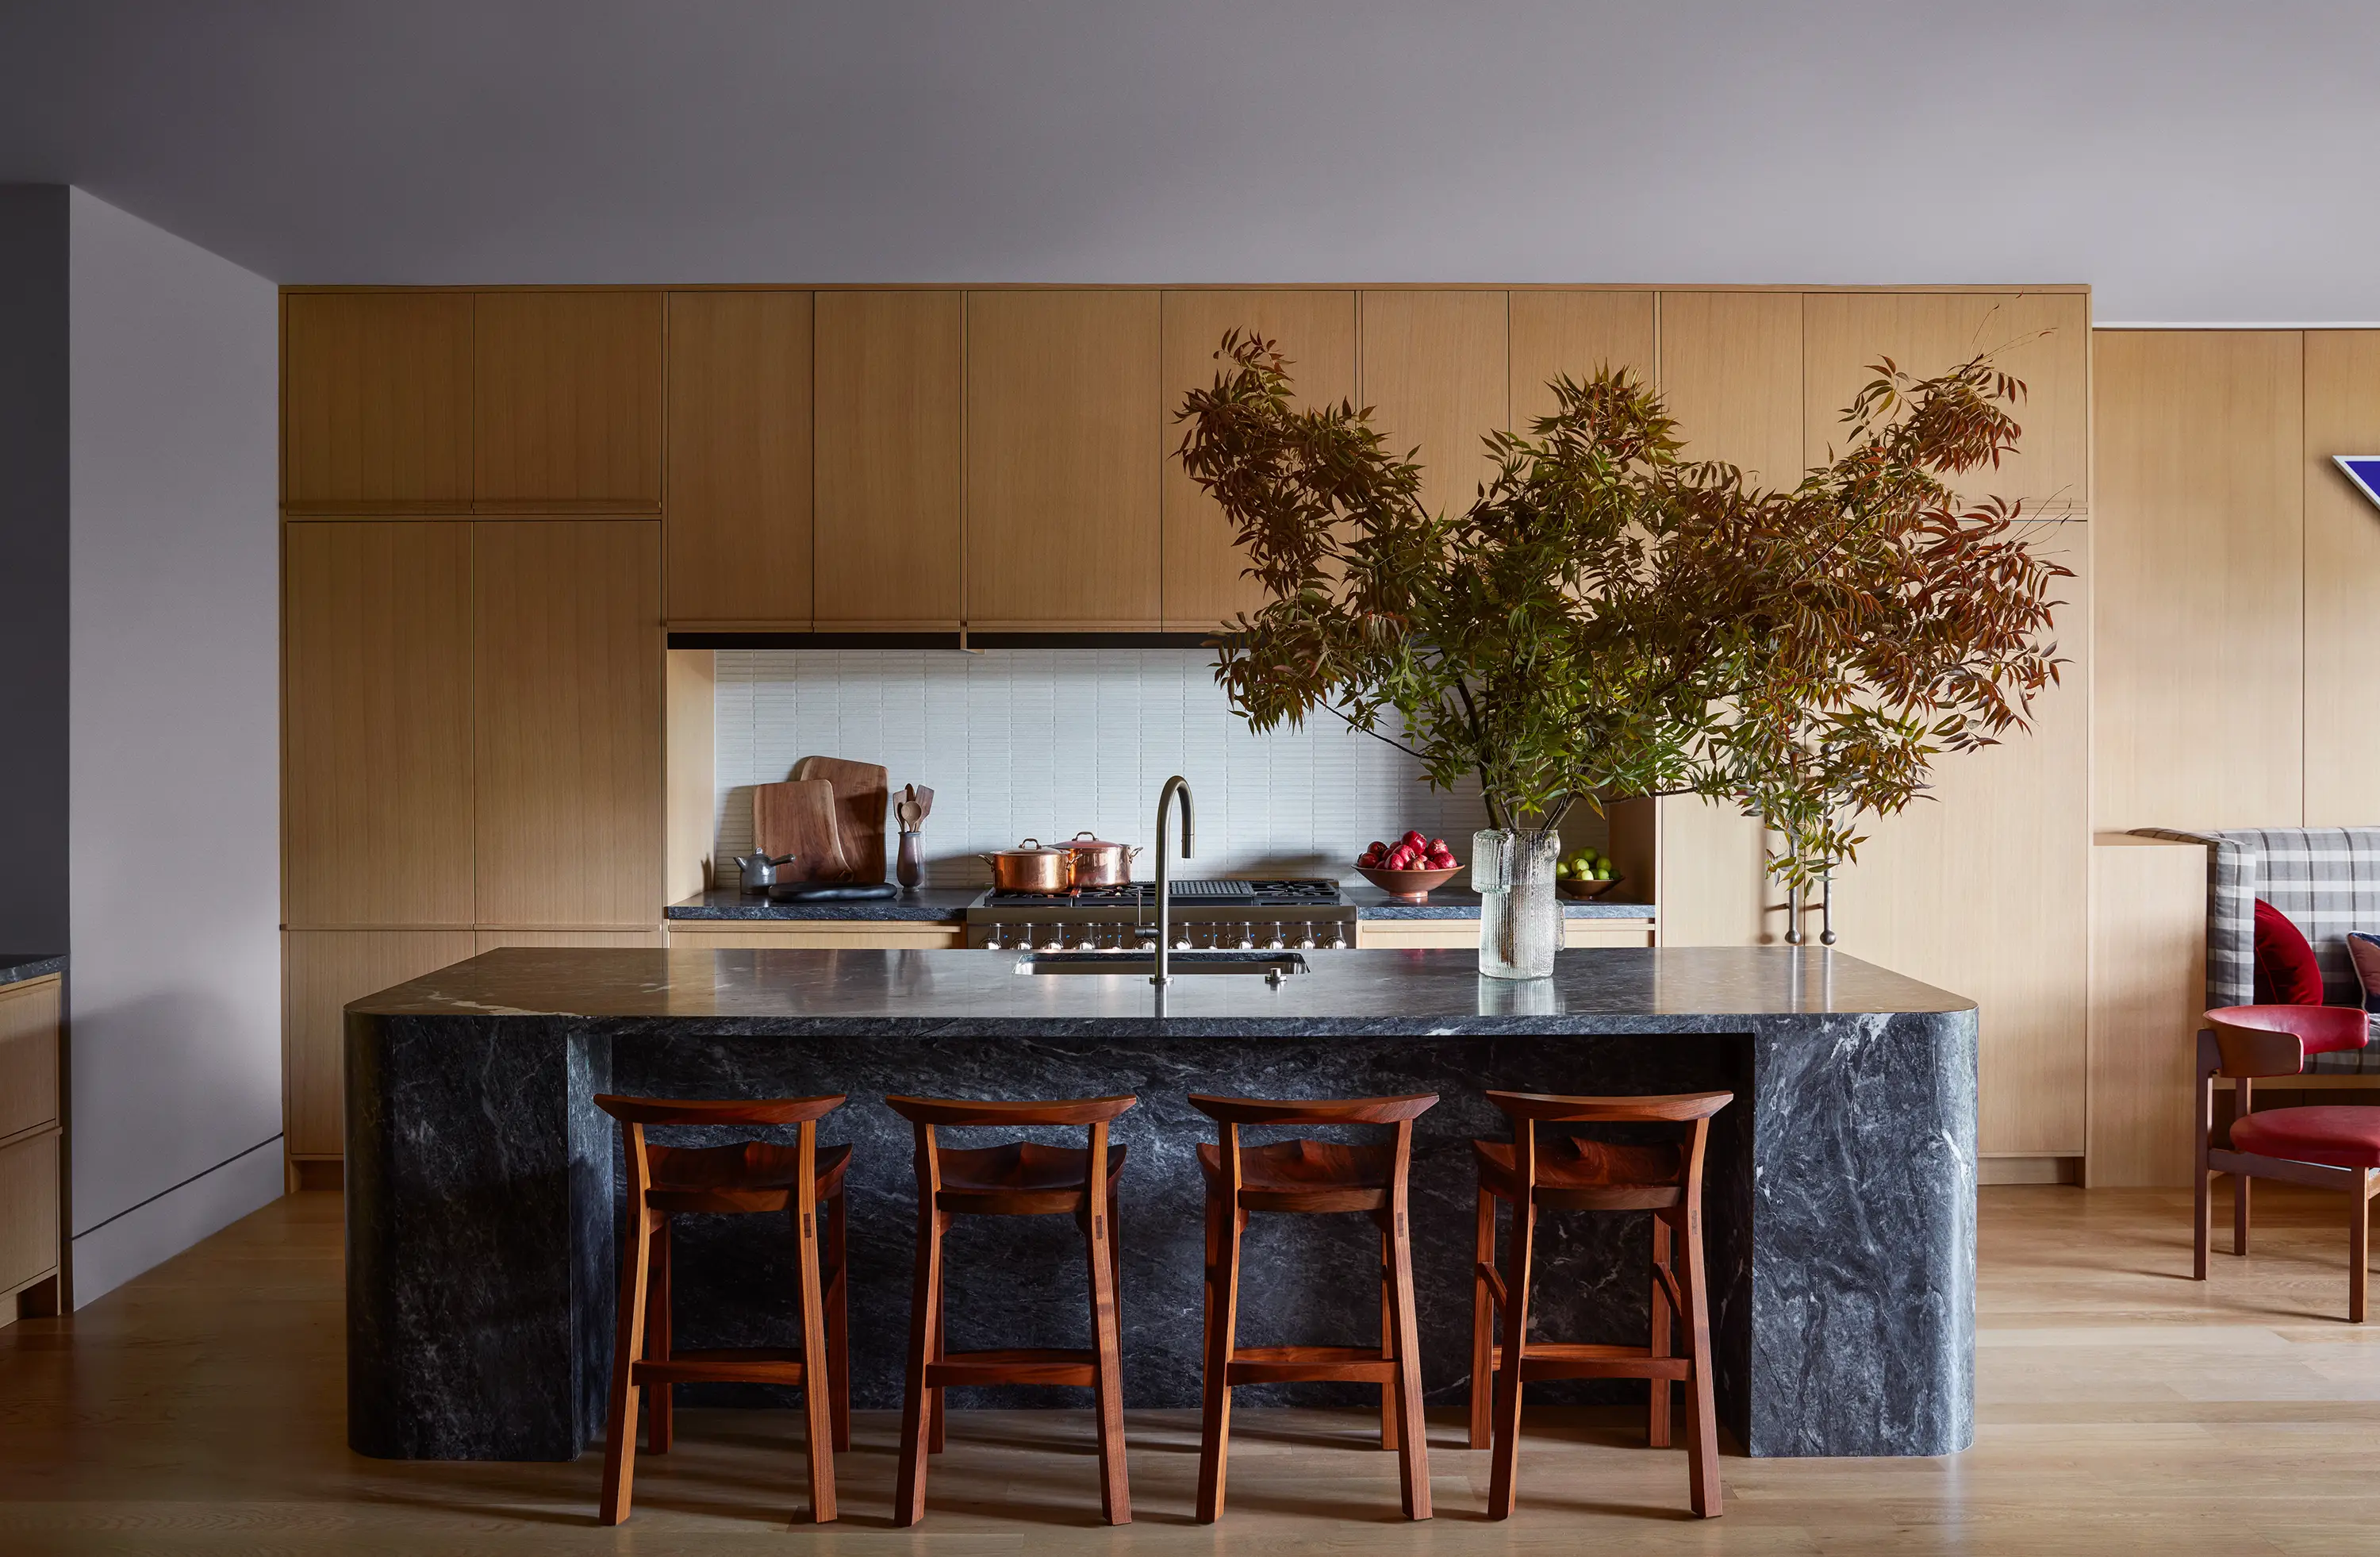 Sunny oak cabinetry and porcelain complement the elegant gray grain of a custom Bardiglio marble island arrayed with Edo Stools in walnut by Thos. Moser.